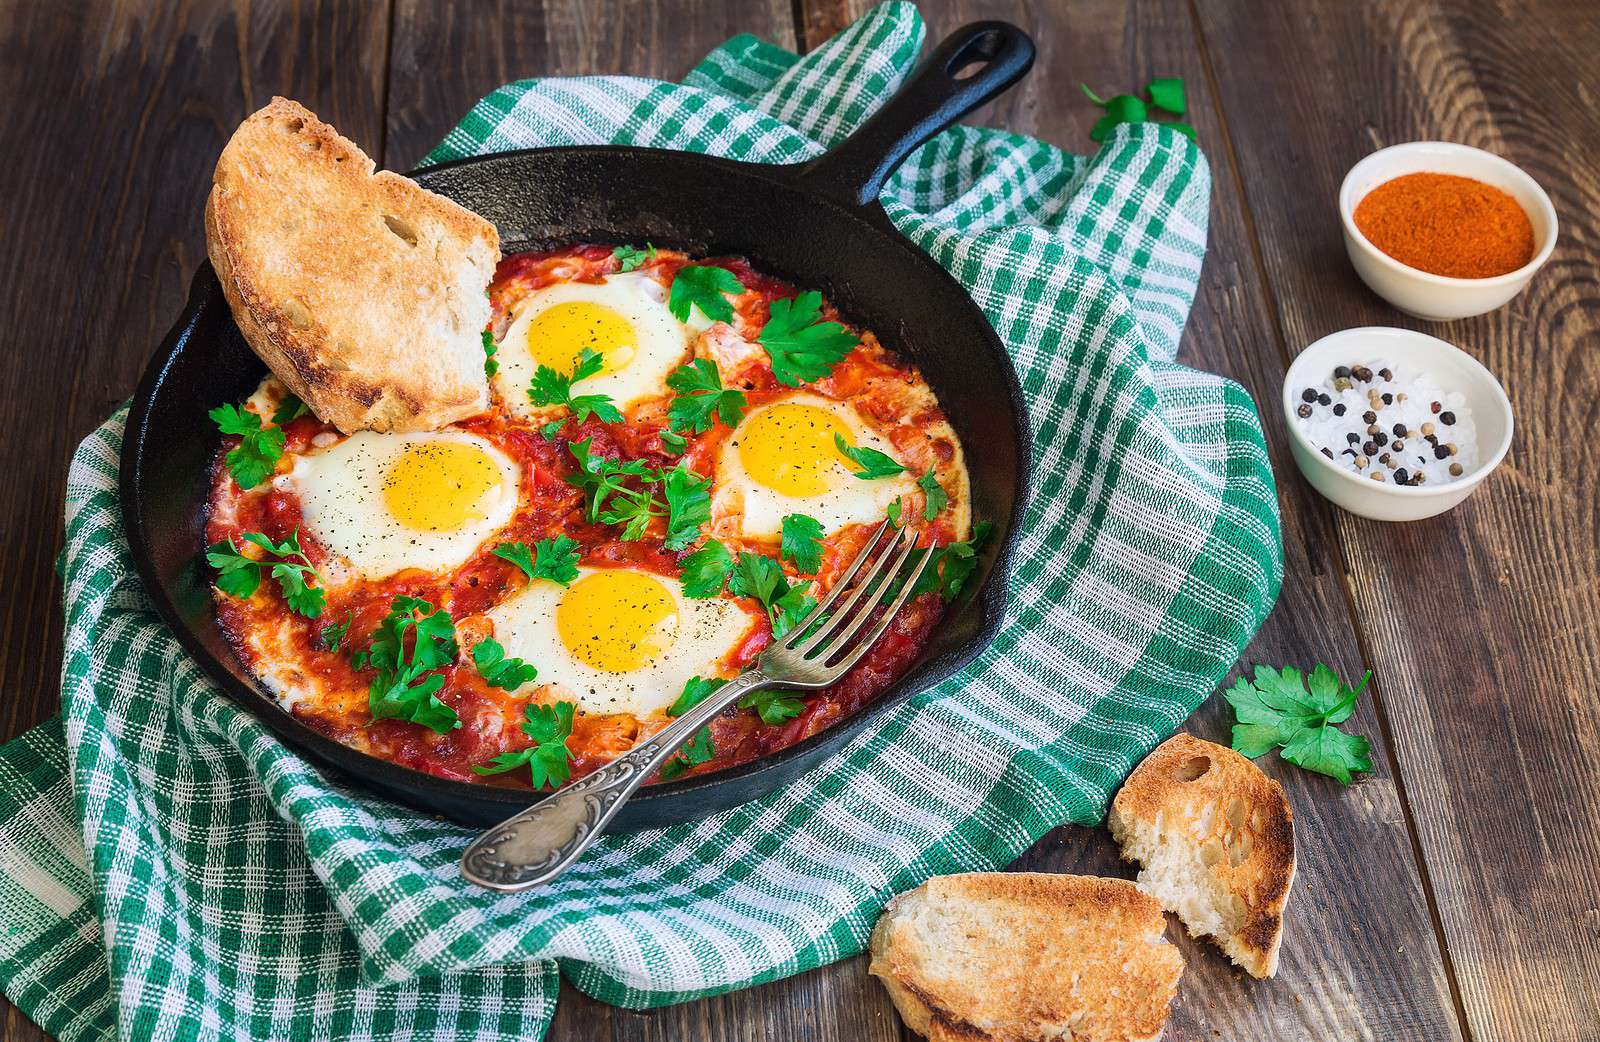 https://www.mealgarden.com/media/recipe/2020/10/bigstock-Fried-Eggs-With-Vegetables-And-276823006.jpeg